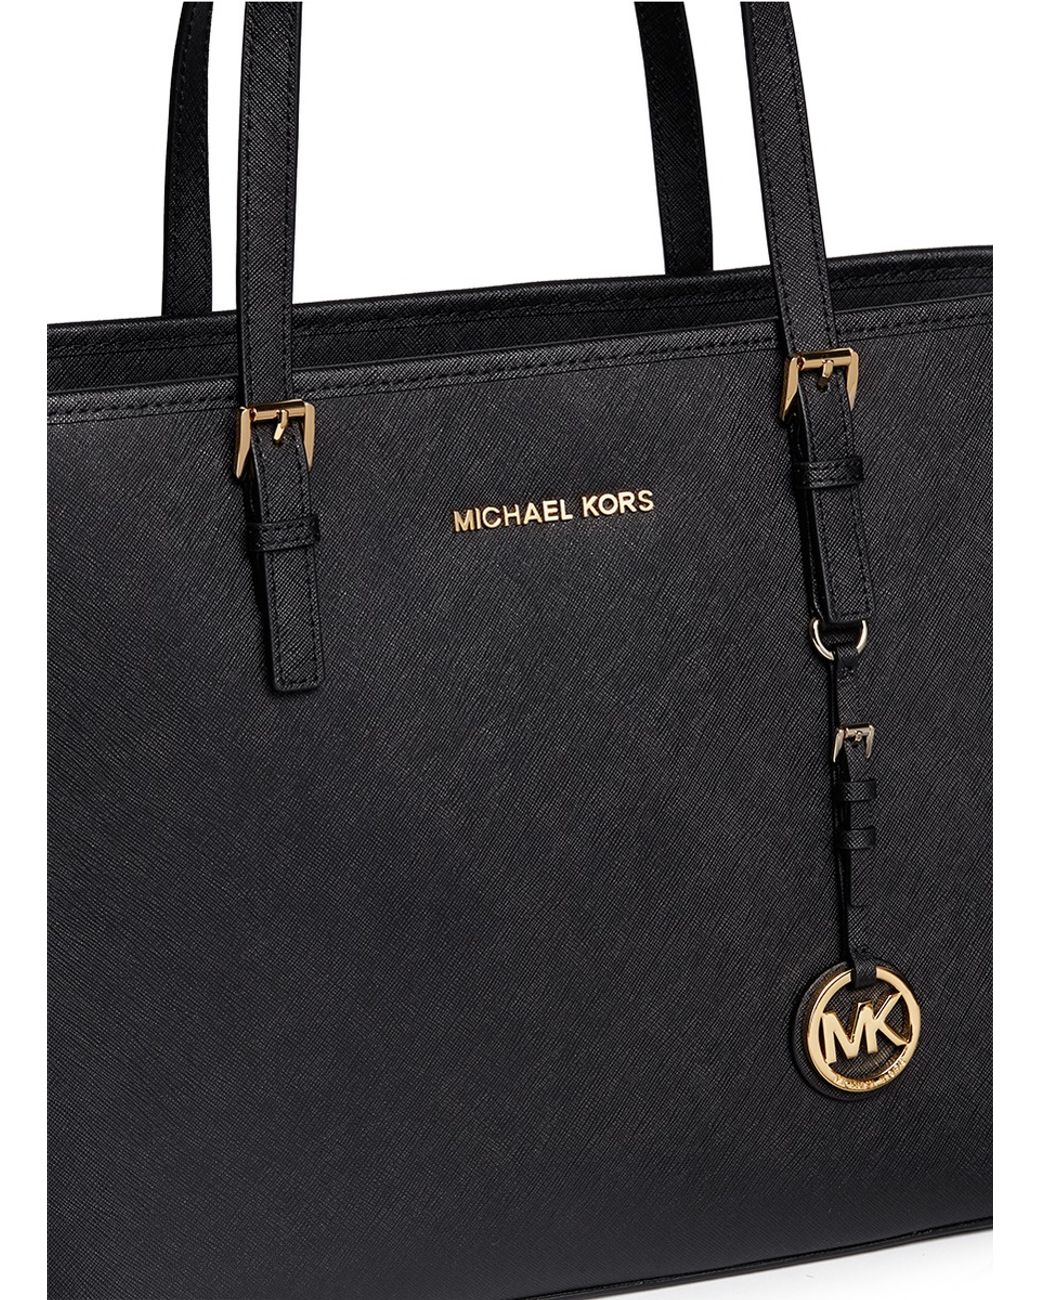 Michael Kors 'jet Set Travel' Saffiano Leather Top Zip Tote in Black | Lyst